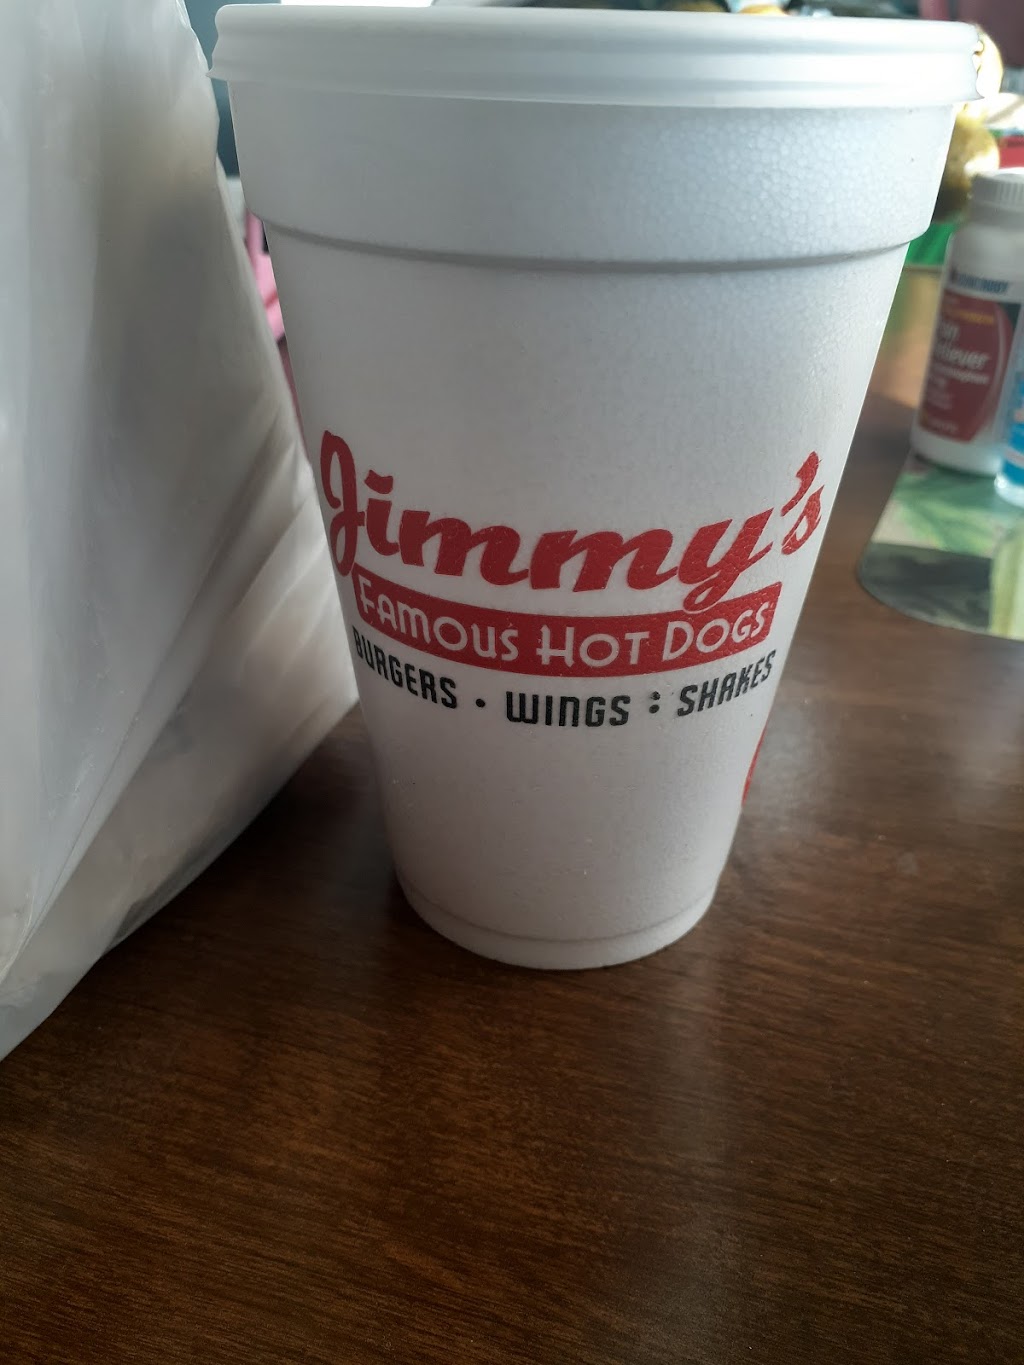 Jimmys Famous Hot Dogs | 4435 NC-55, Durham, NC 27713 | Phone: (919) 361-6888